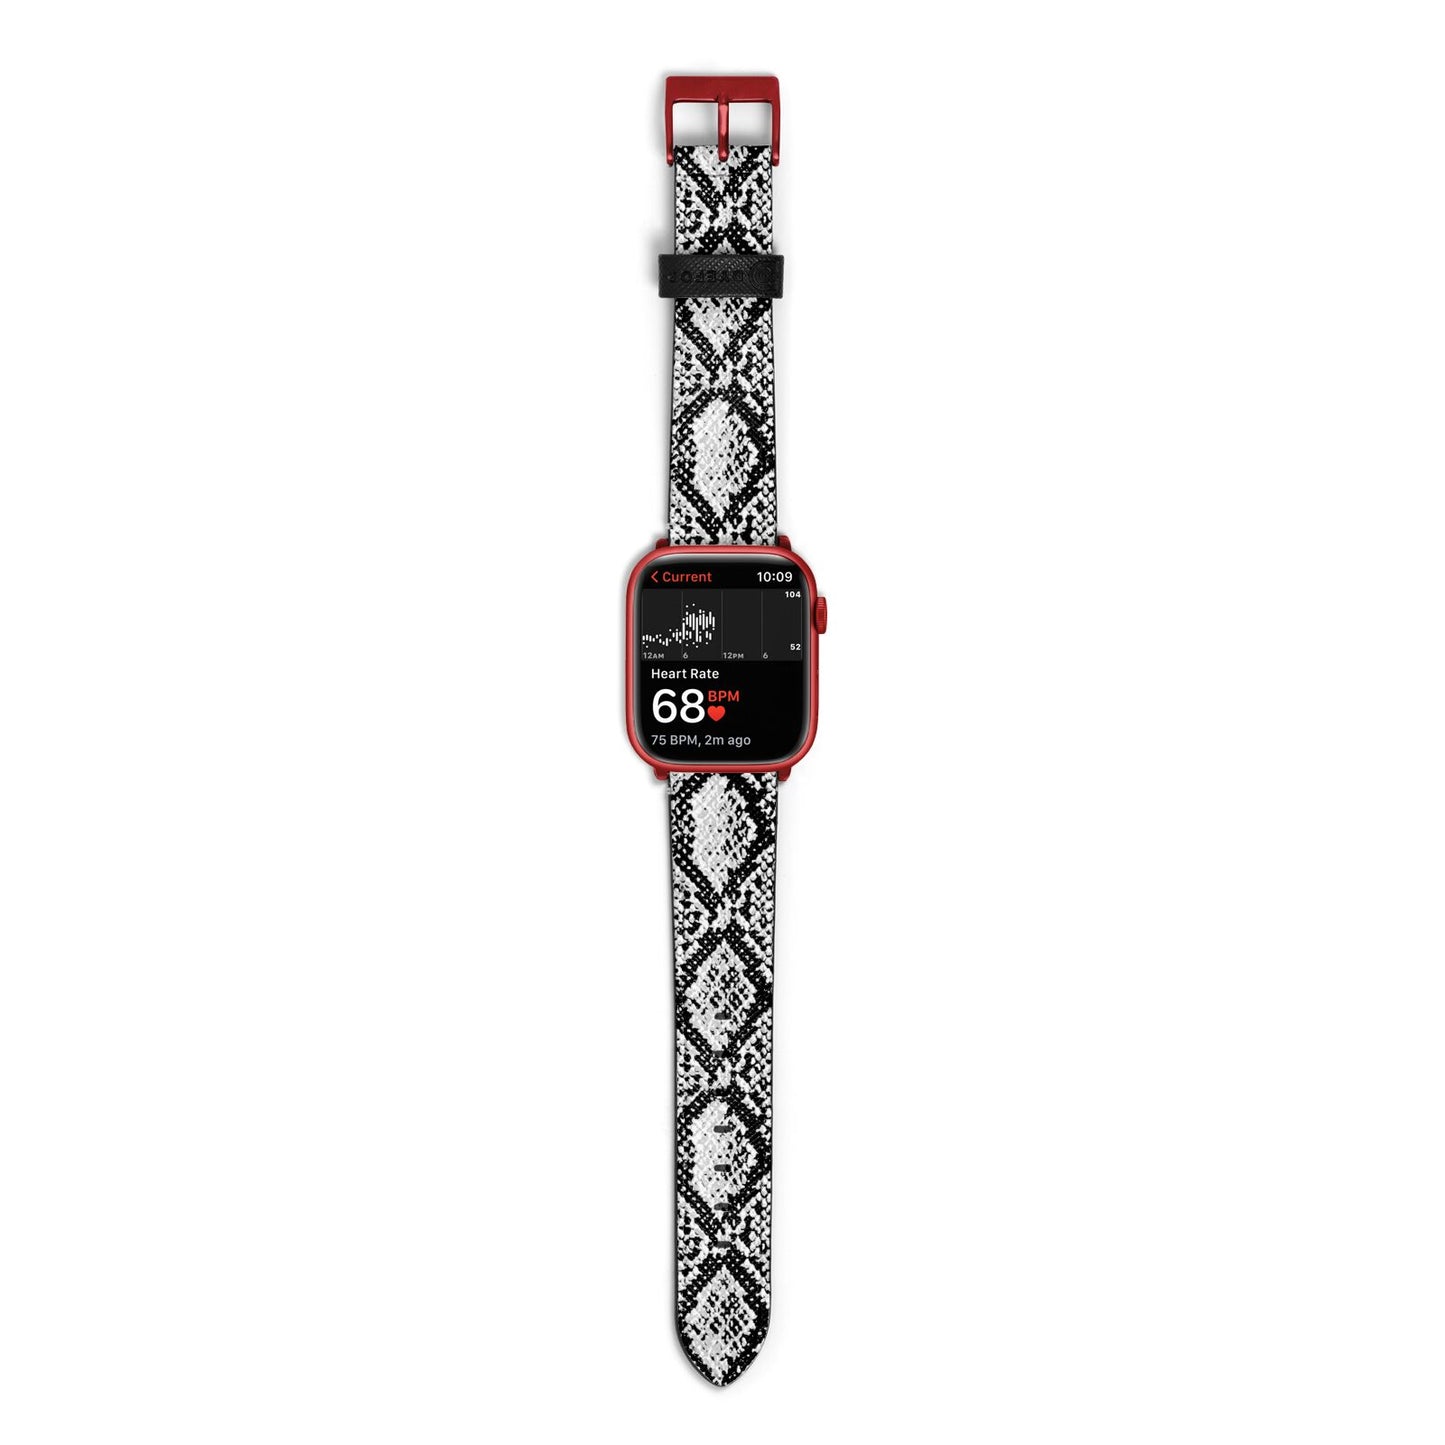 Black Snakeskin Apple Watch Strap Size 38mm with Red Hardware